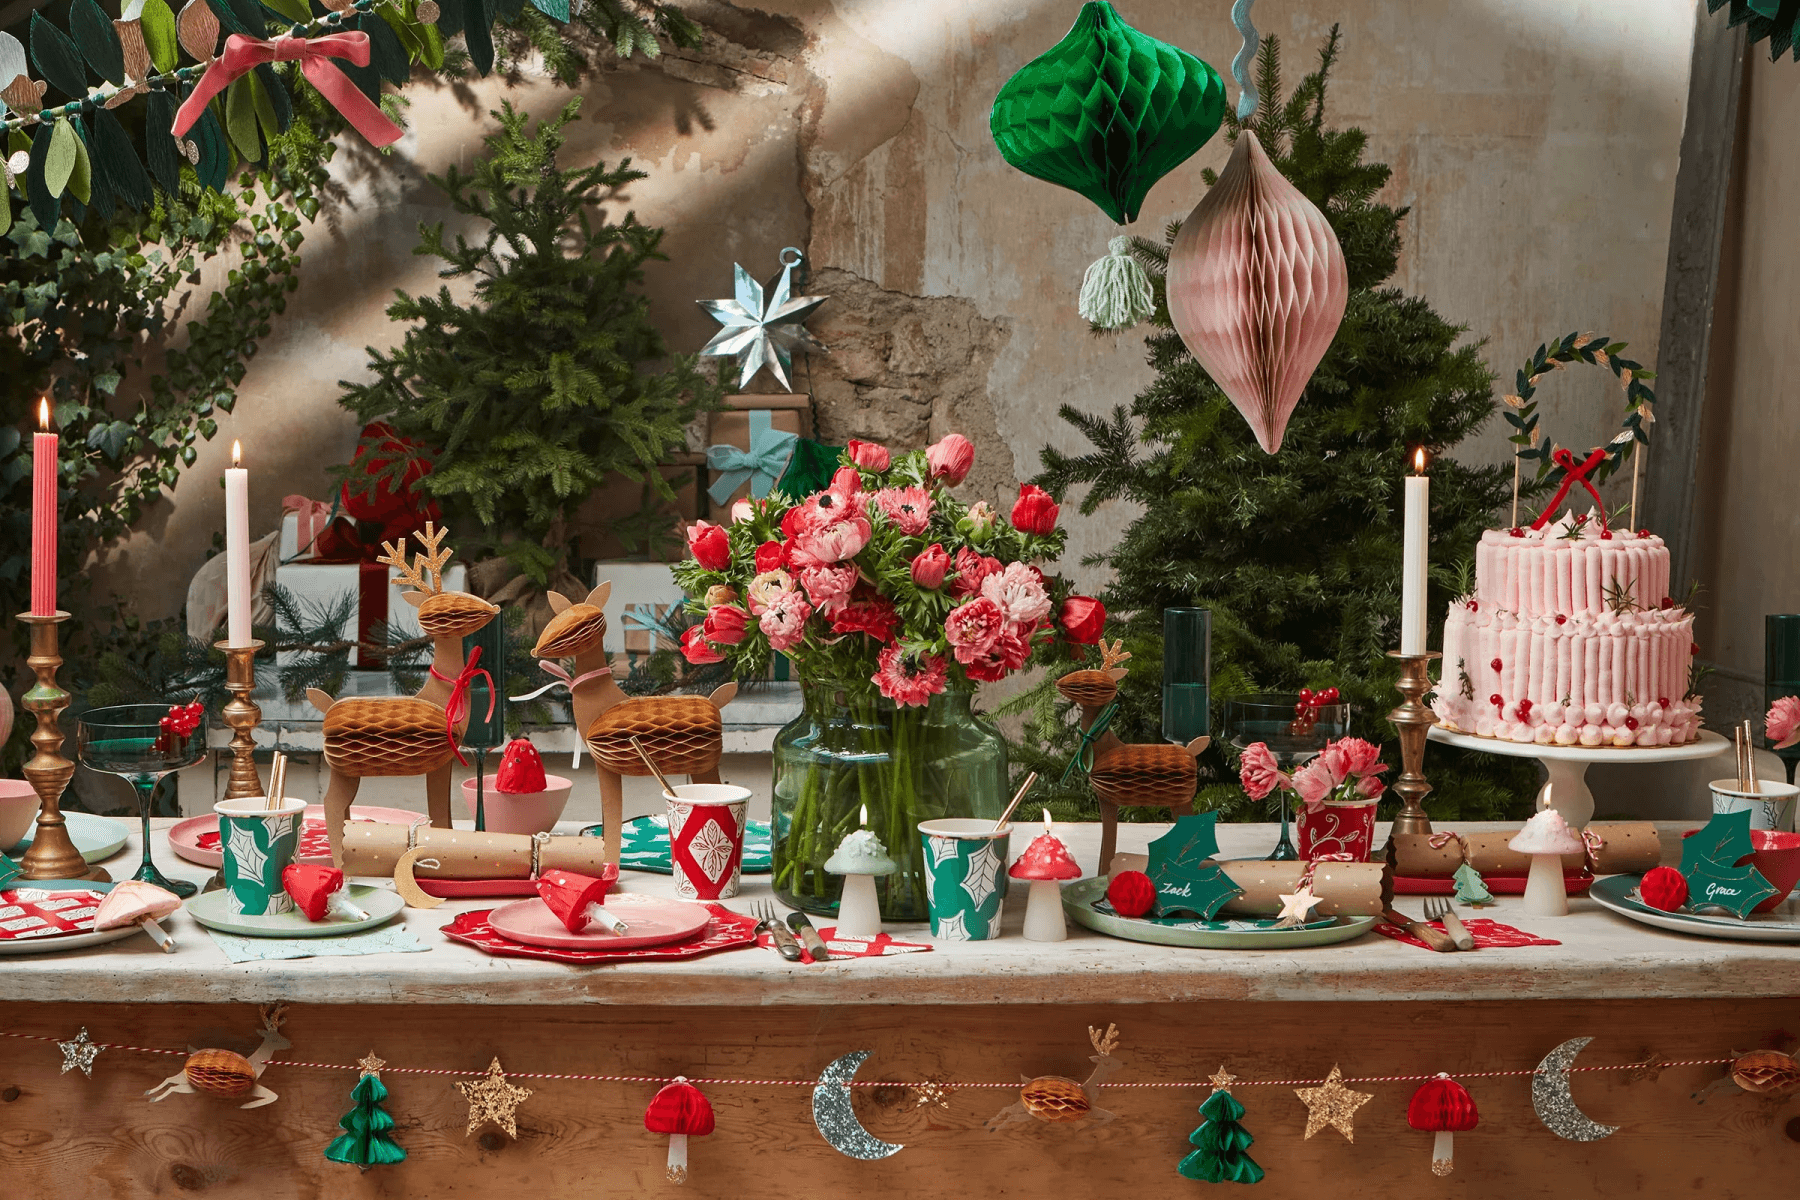 How to Host a Holiday Party at Home - Decorations & Activities